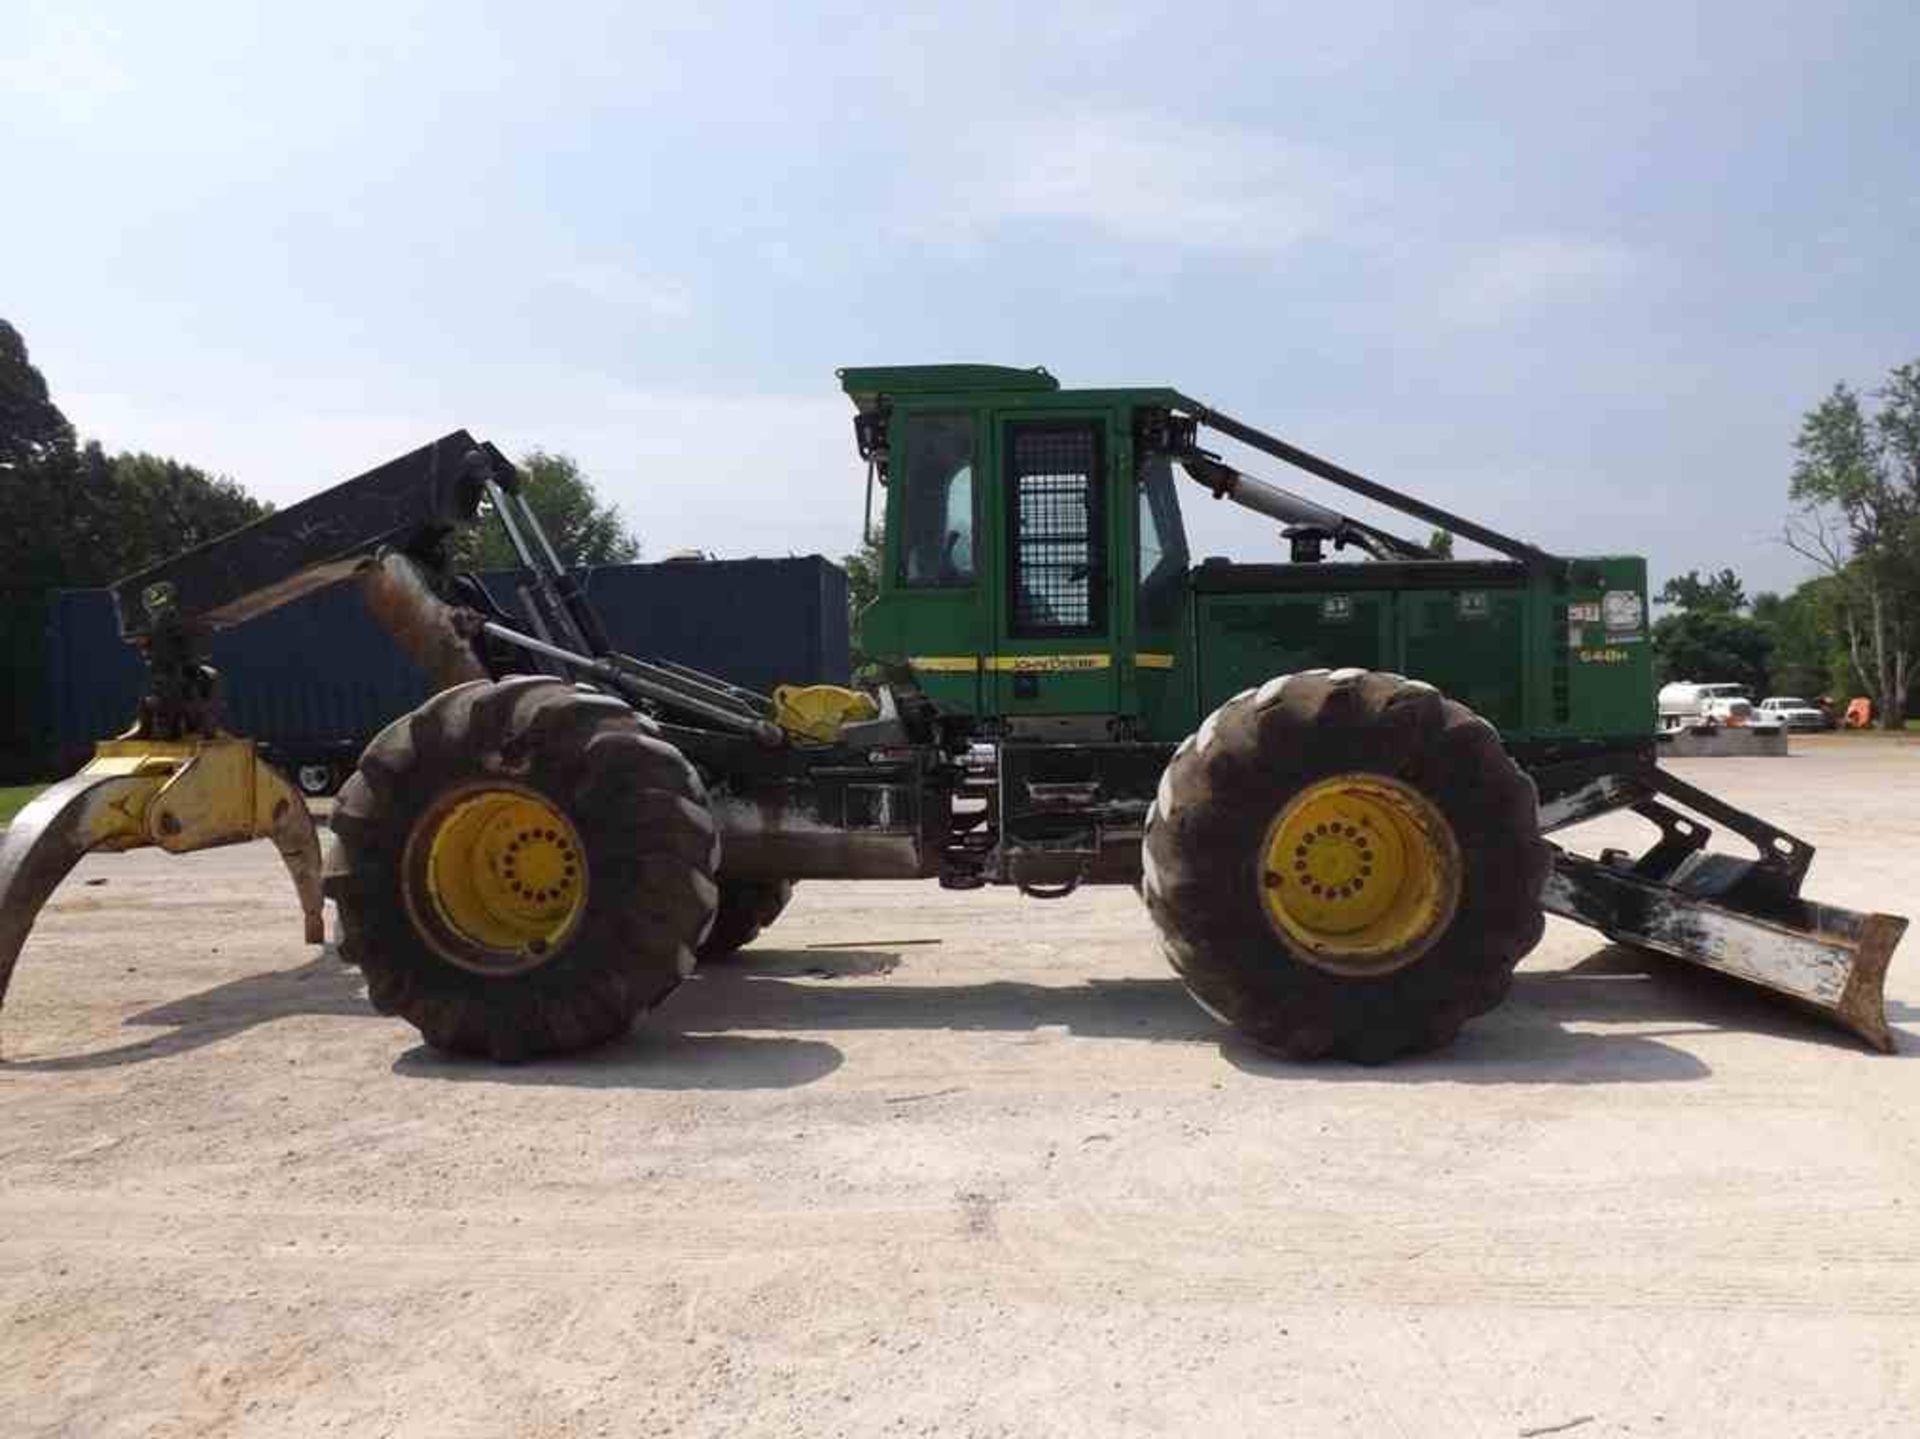 2010 JOHN DEERE 648H DUAL ARCH GRAPPLE SKIDDER W/ENCLOSED CAB WITH HEAT & AIR; W/30.5X32 RUBBER; S/ - Image 4 of 5